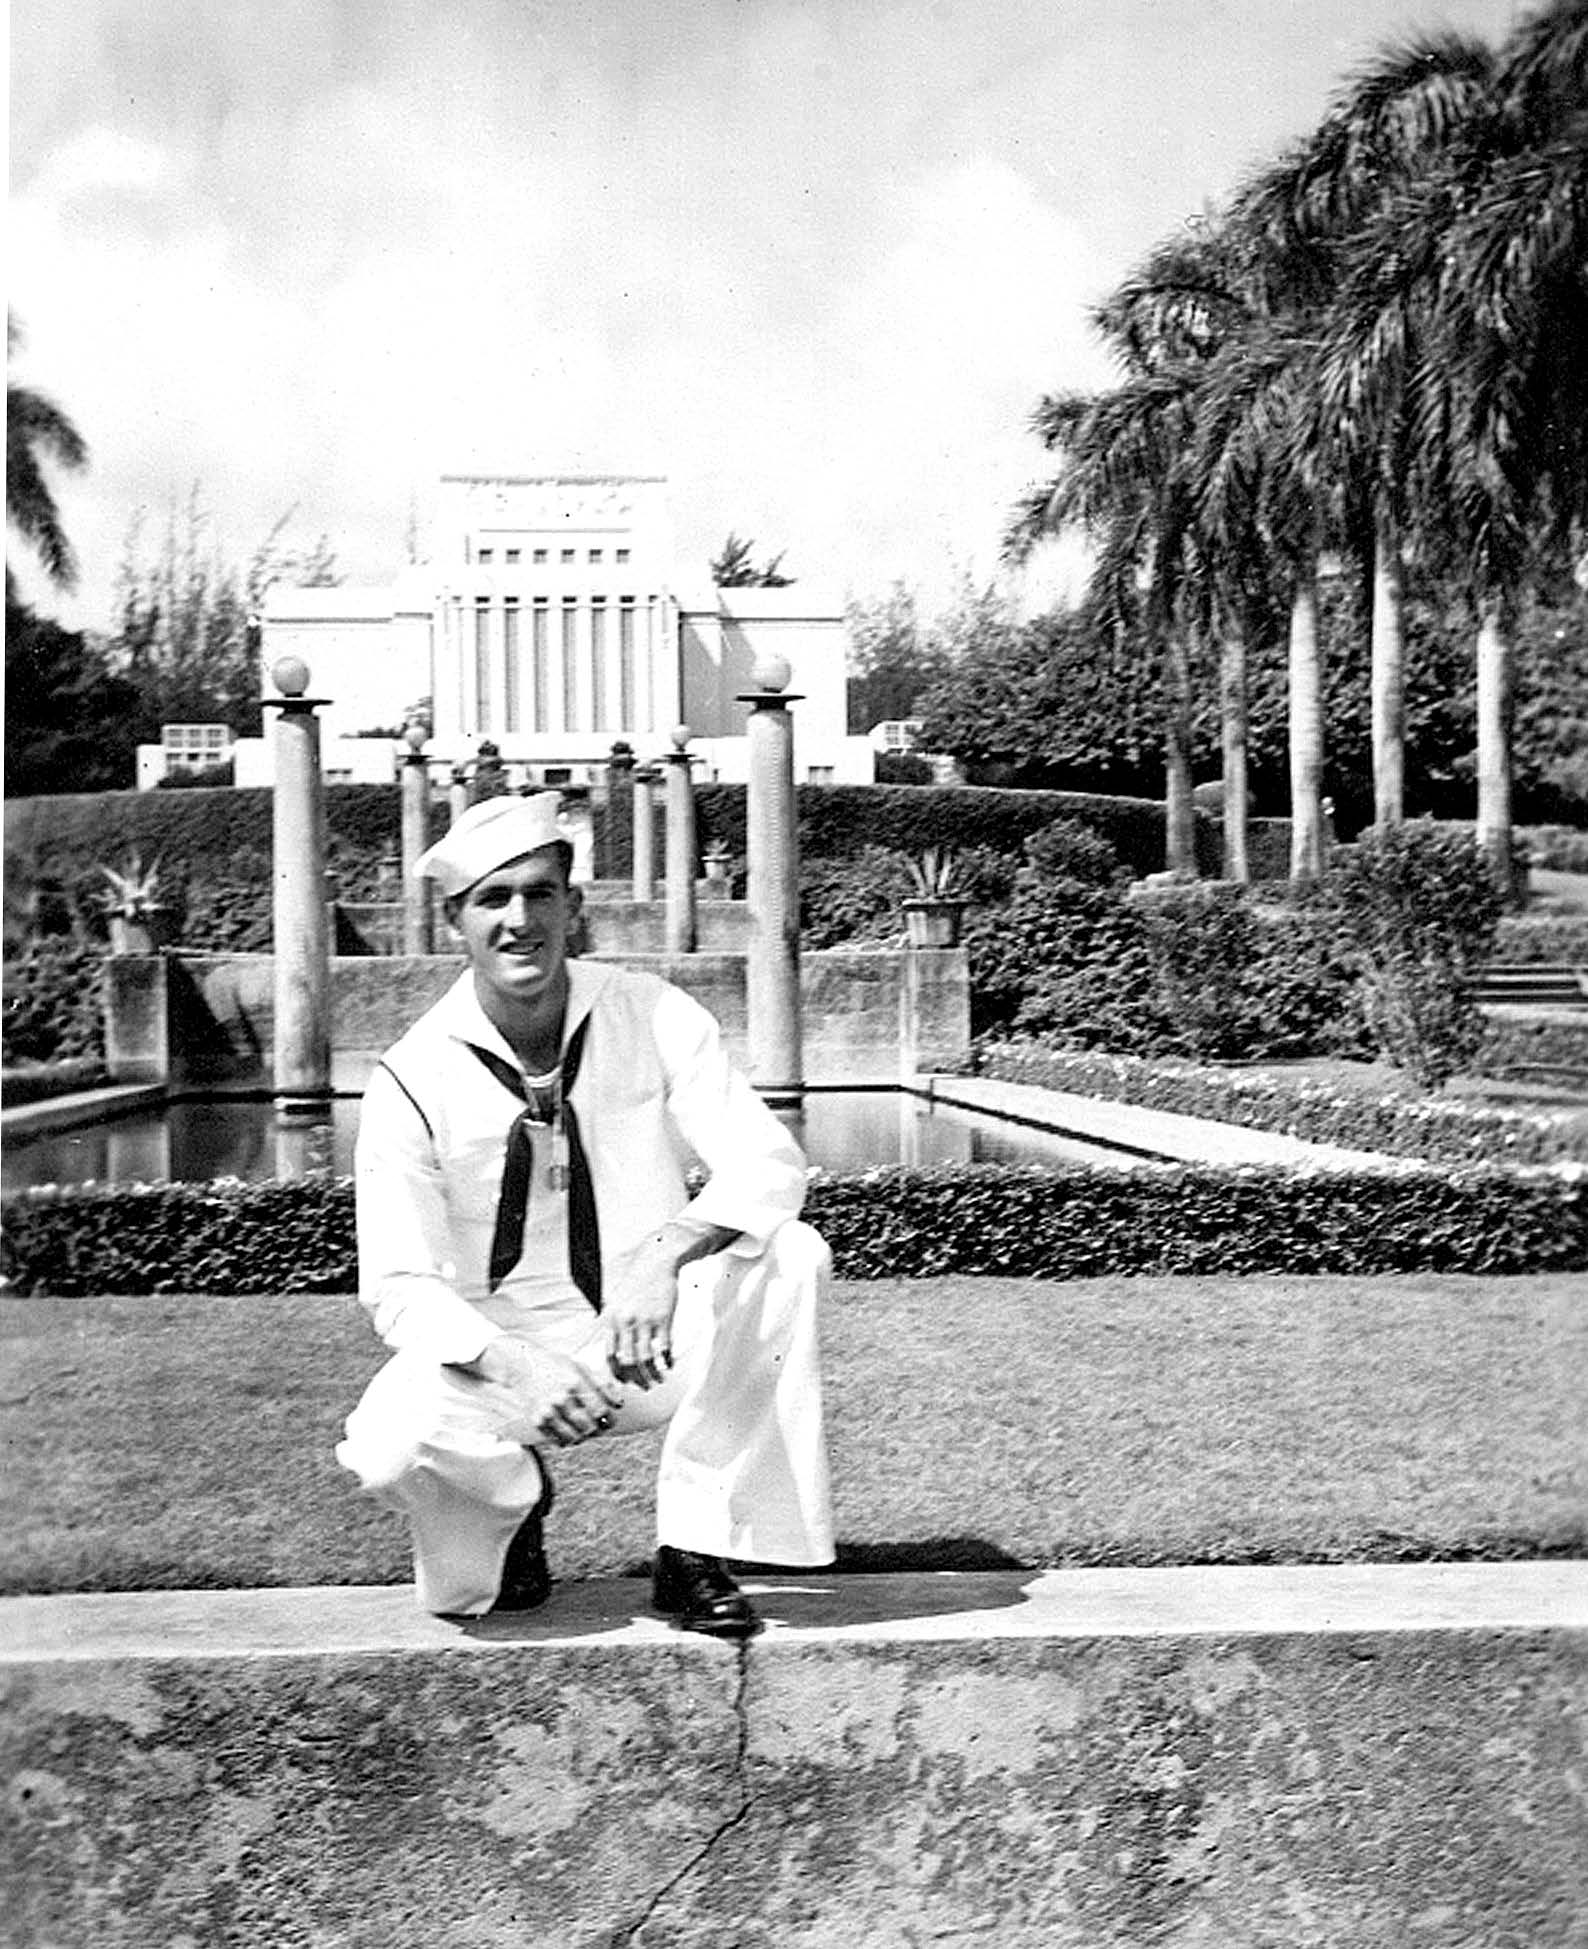 During World War II thousands of servicemen visited the temple grounds. These photos of crew members of the battleship North Carolina were likely taken in 1942 after their ship was struck by a torpedo and then docked in Hawai‘i for repairs. Left: Crew member John Stewart poses in front of the temple. Photos courtesy of battleship North Carolina, used by permission.